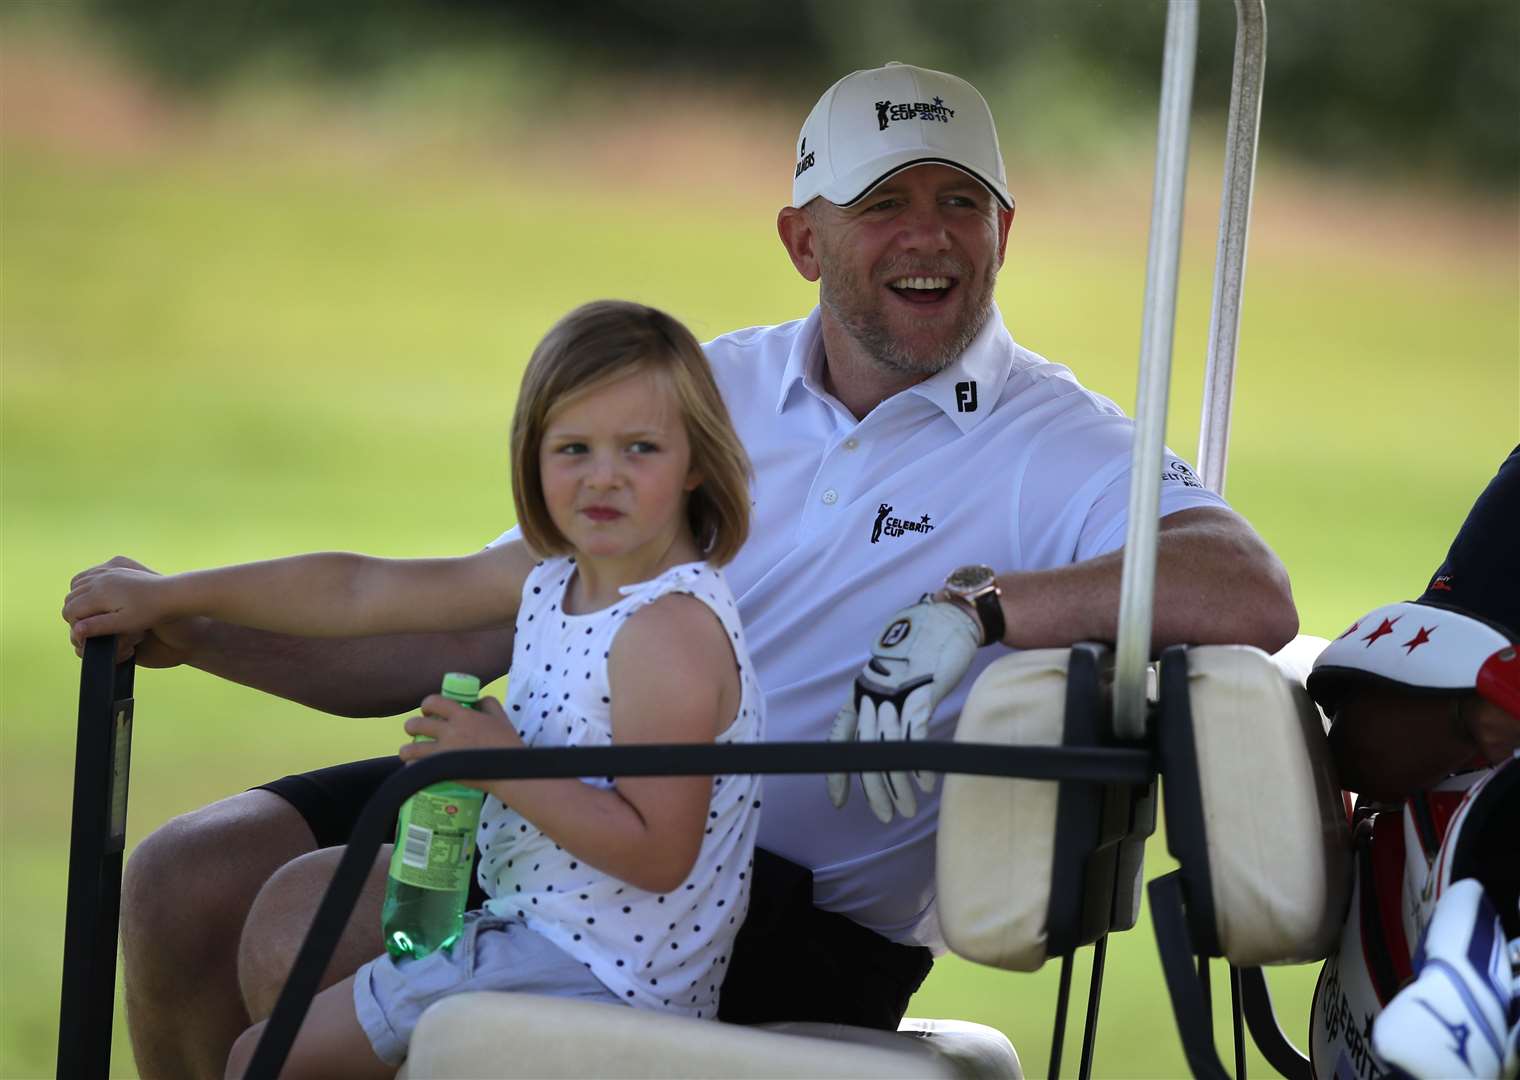 Mike Tindall rides on a golf cart with his daughter Mia during a Celebrity Cup charity fundraiser golf tournament (Andrew Matthews/PA)